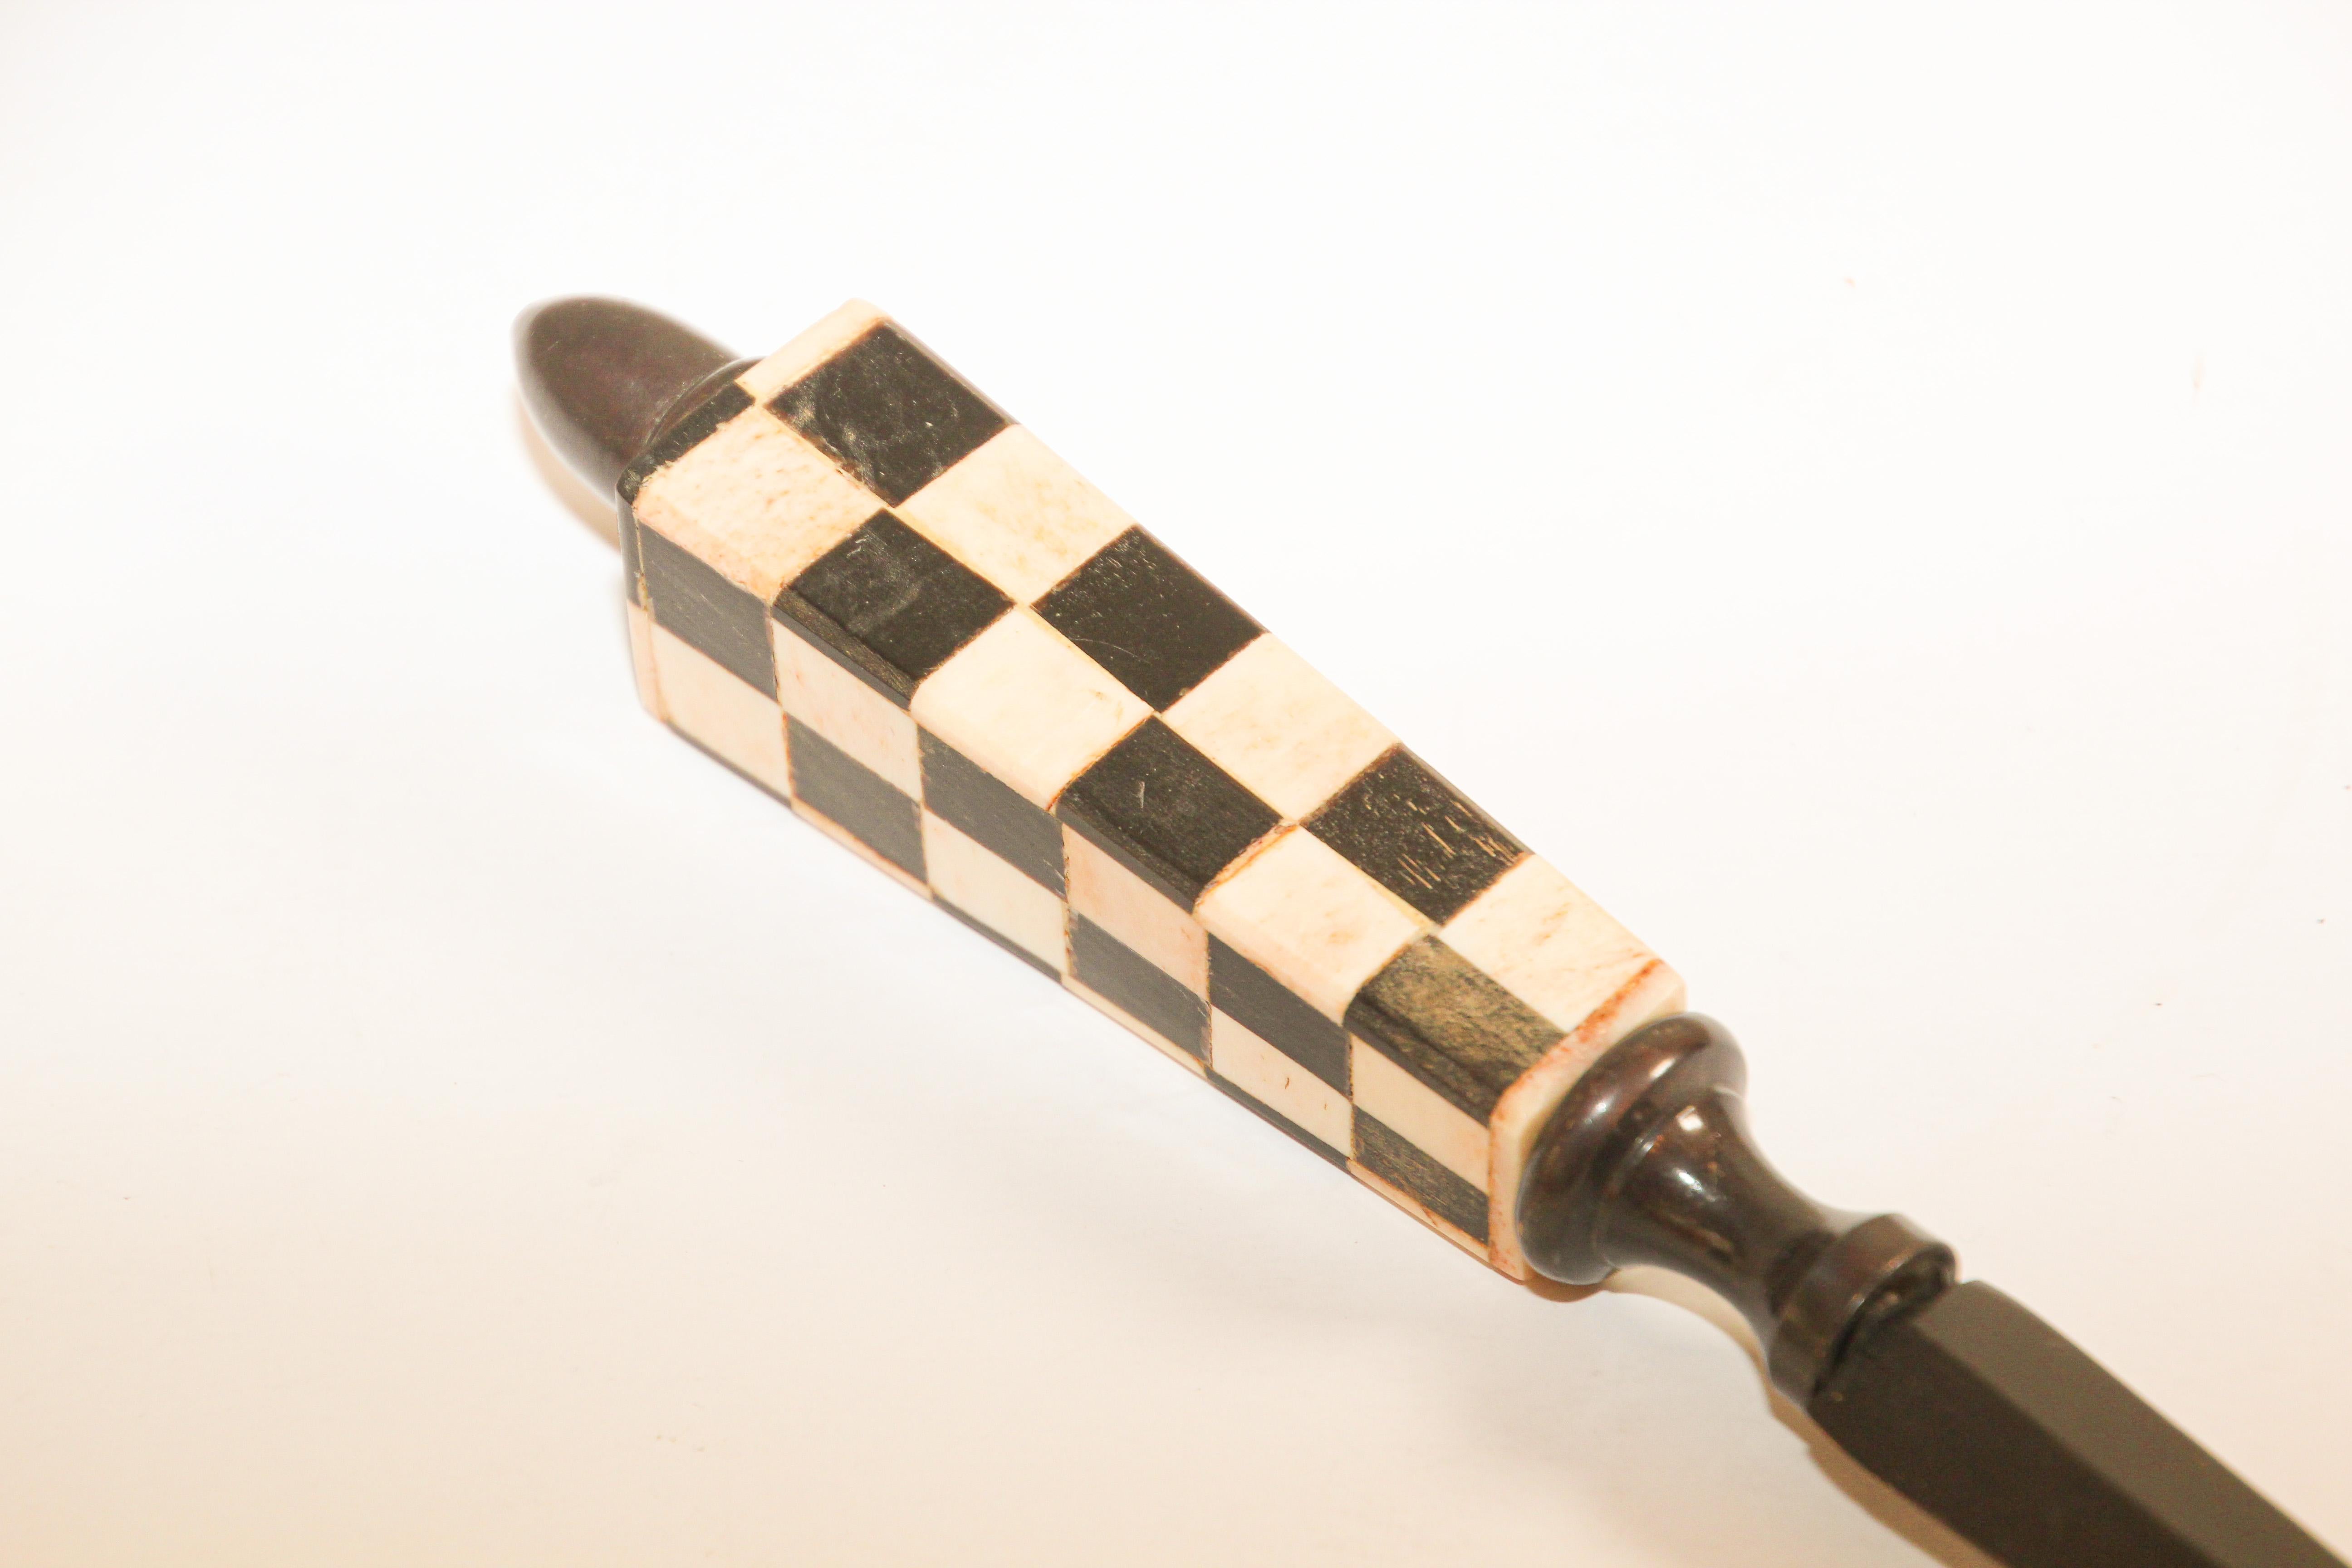 Handcrafted beautiful artisan made letter opener with black and white checker board Buffalo bone clad handle and blade in dark oiled bronze patina
Length: 11